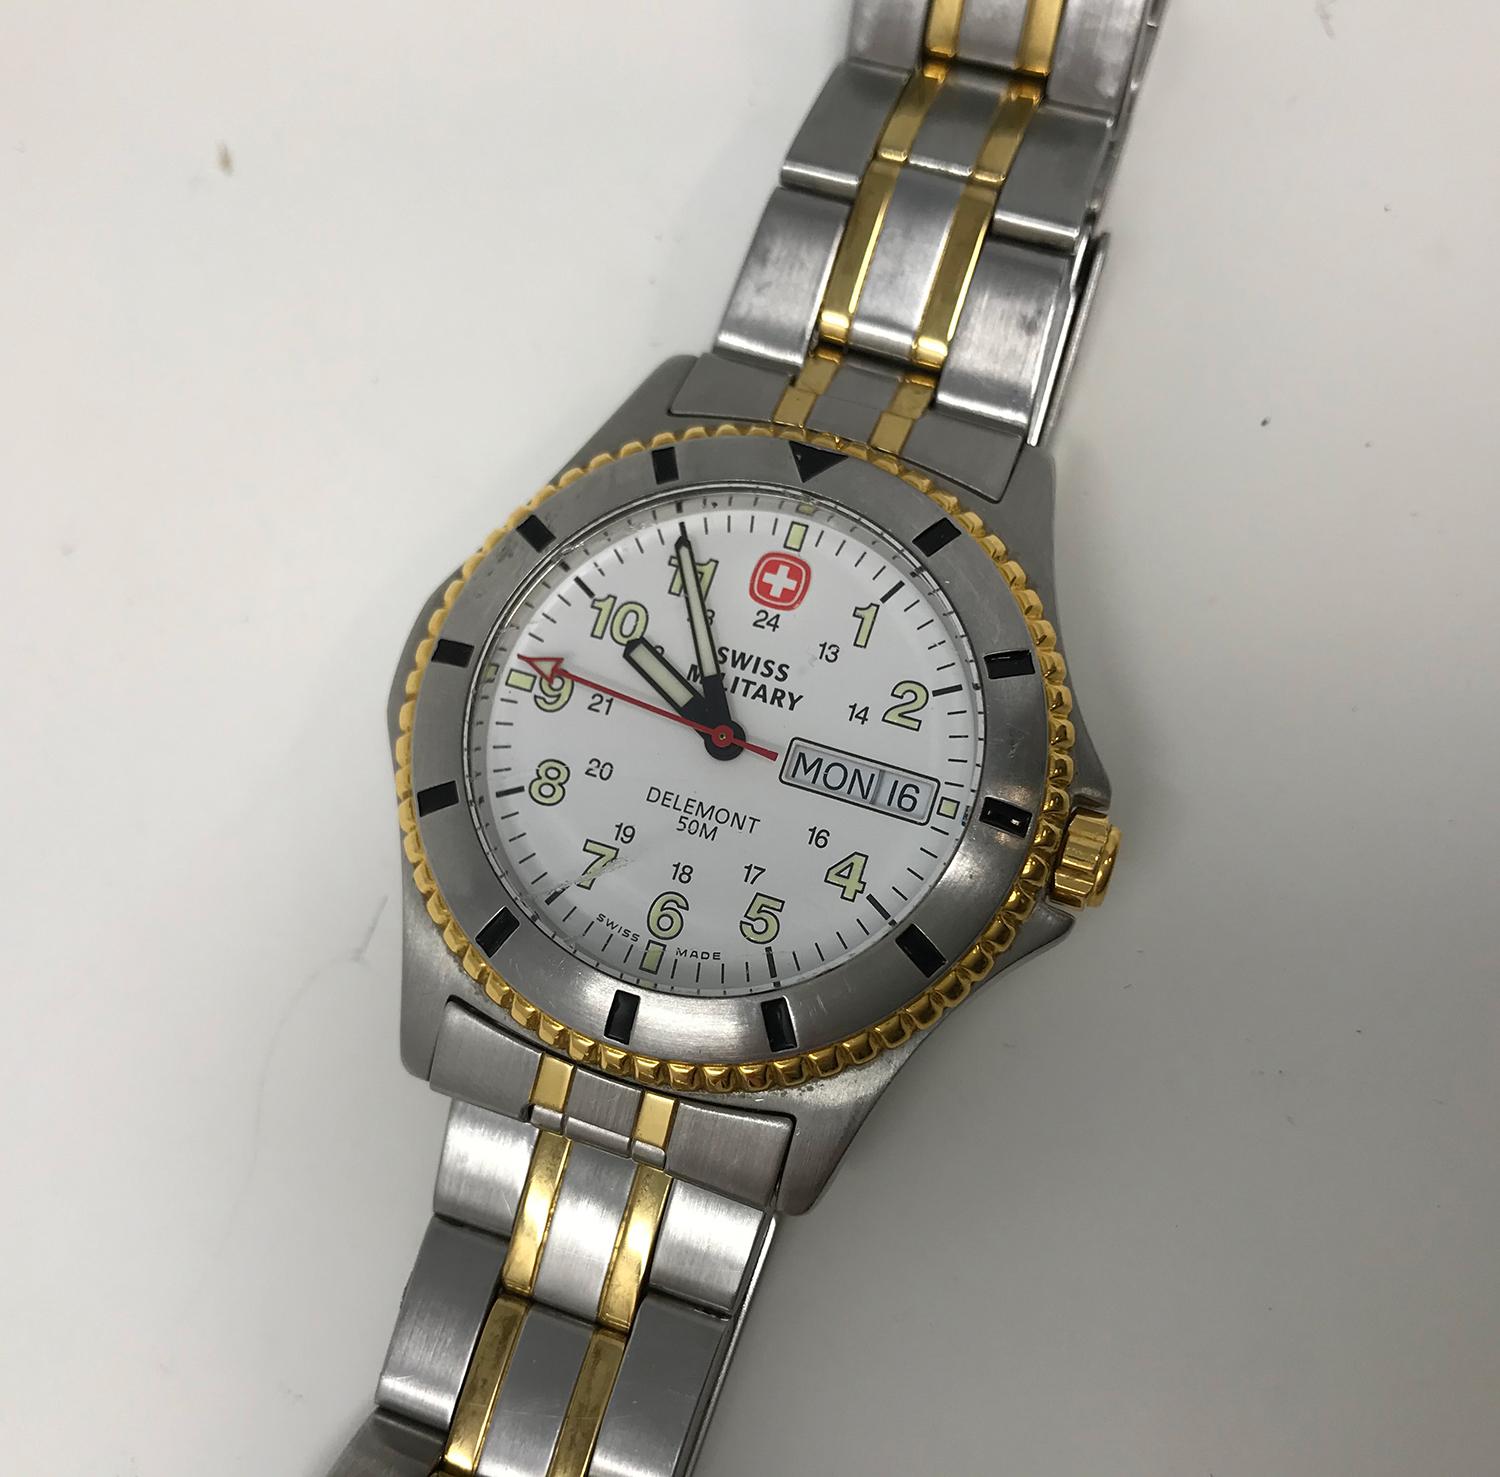 Swiss Military Delemont quartz movement stainless steel watch, Swiss-made 0960627. The watch is water resistant up to 50m. Analog dial with a case size of 39mm. The watch will fit an 8-8 1/2-inch wrist and has a safety clip. In good working order,